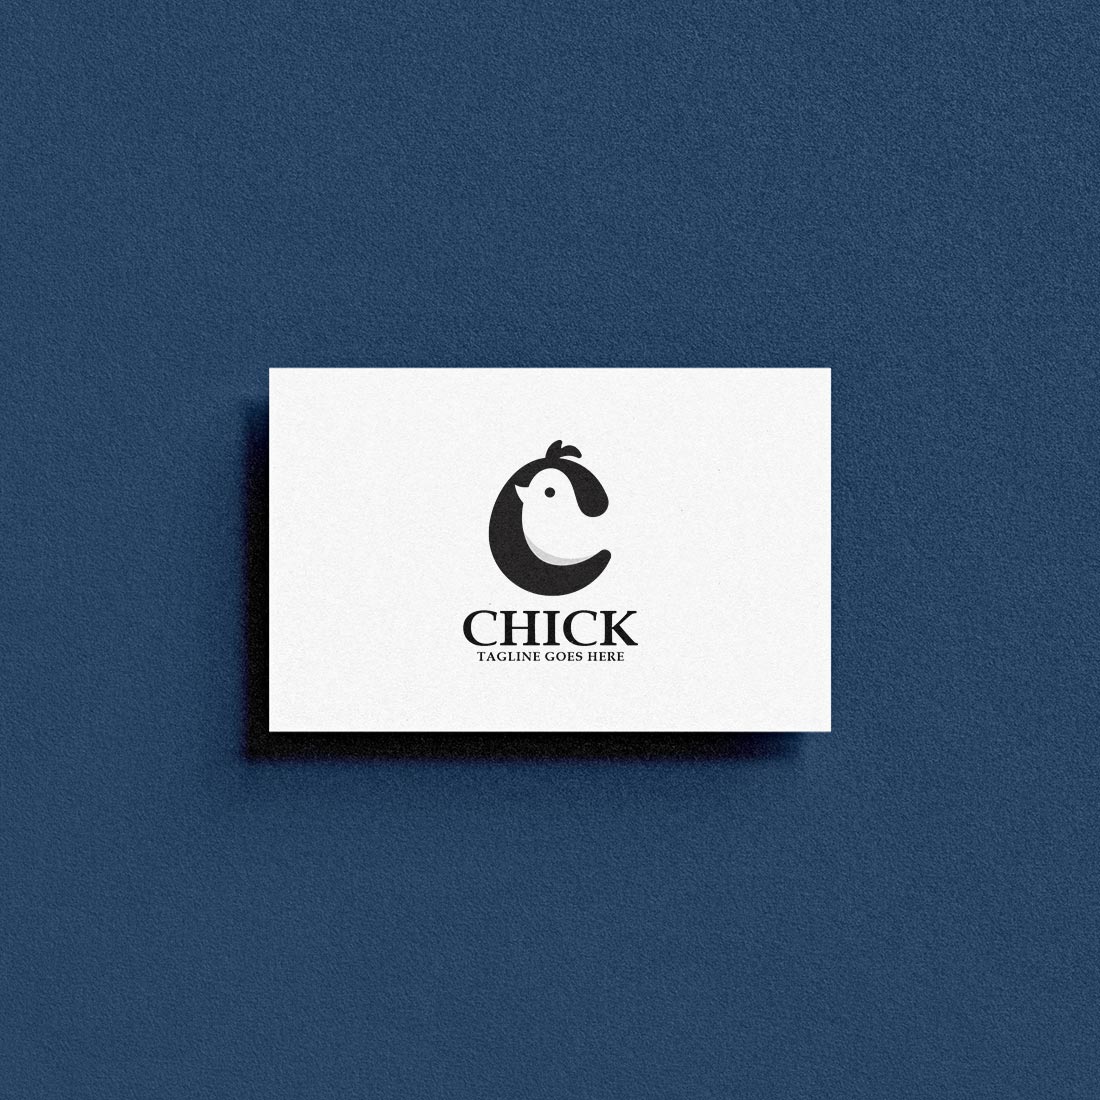 White business card with a black and white logo.